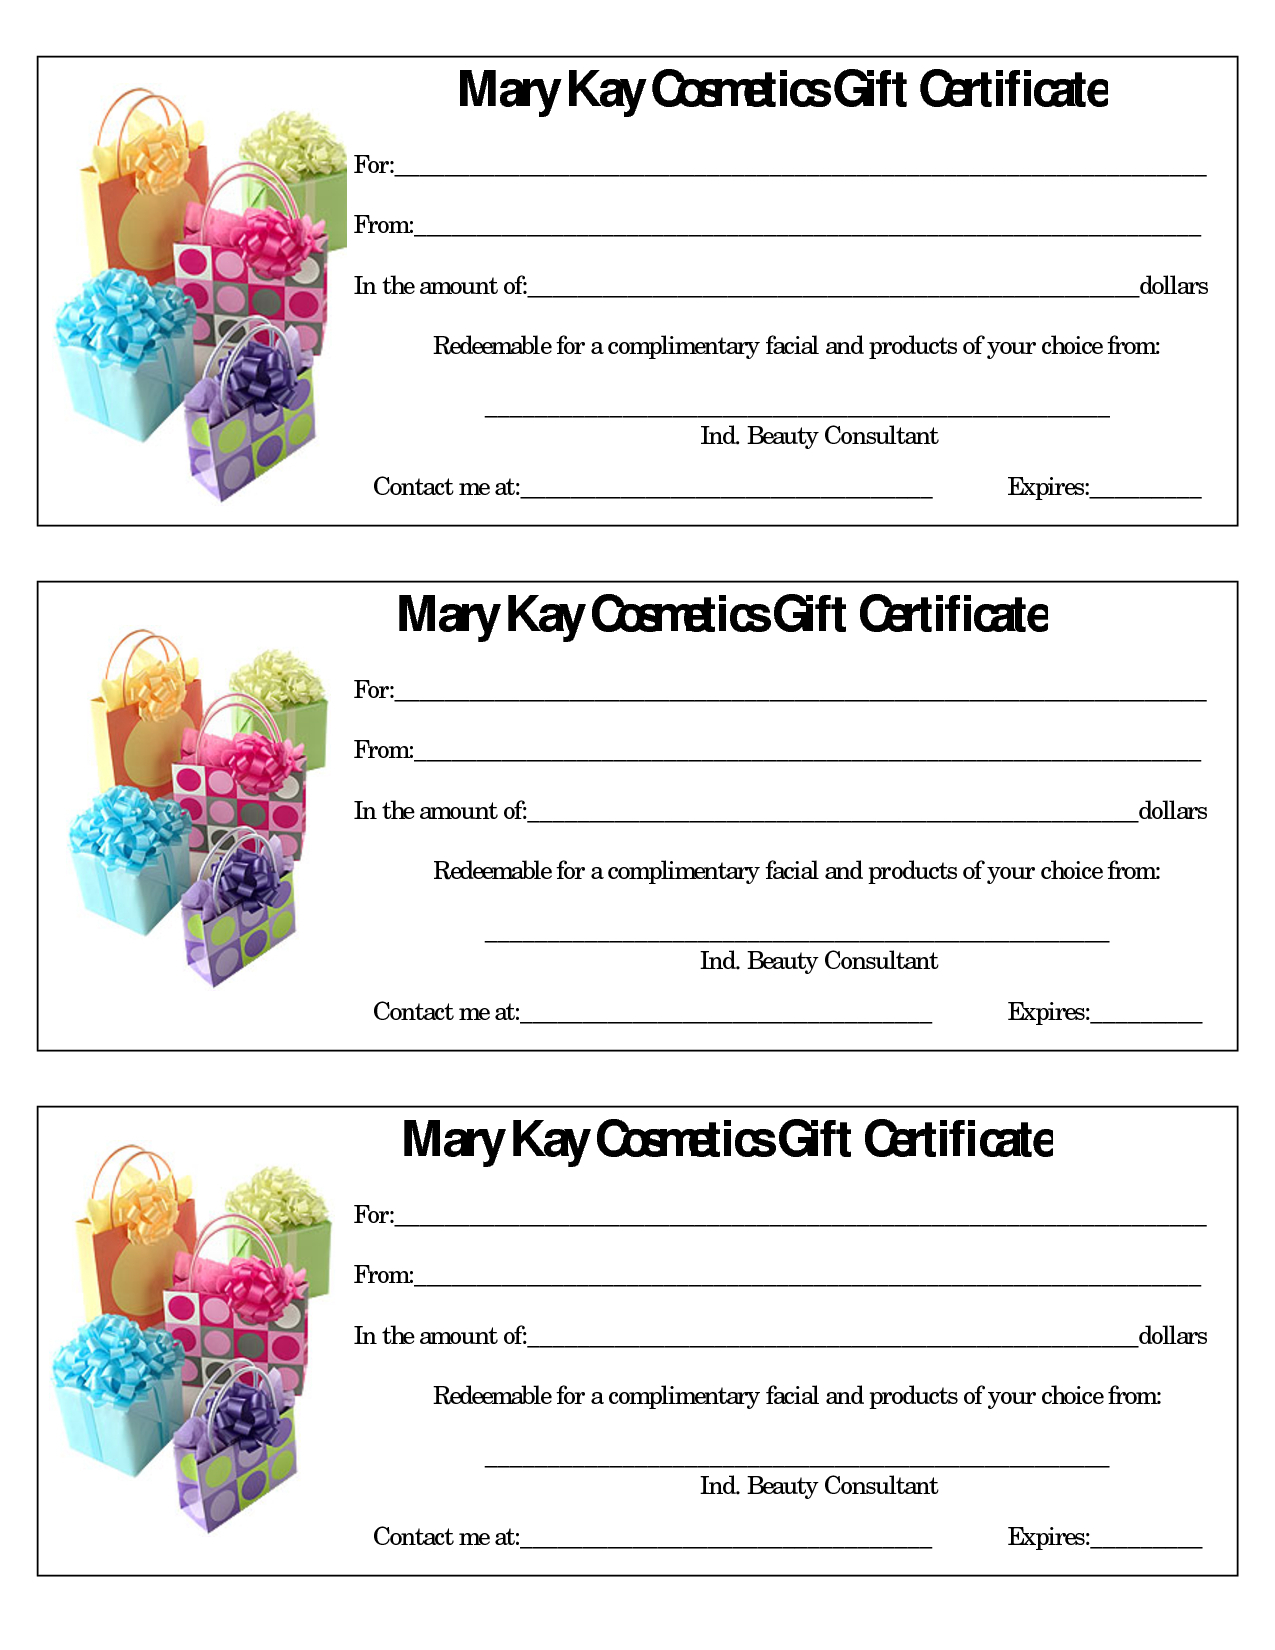 Mary Kay Gift Certificate Template Free Download Within Mary Kay Gift Certificate Template